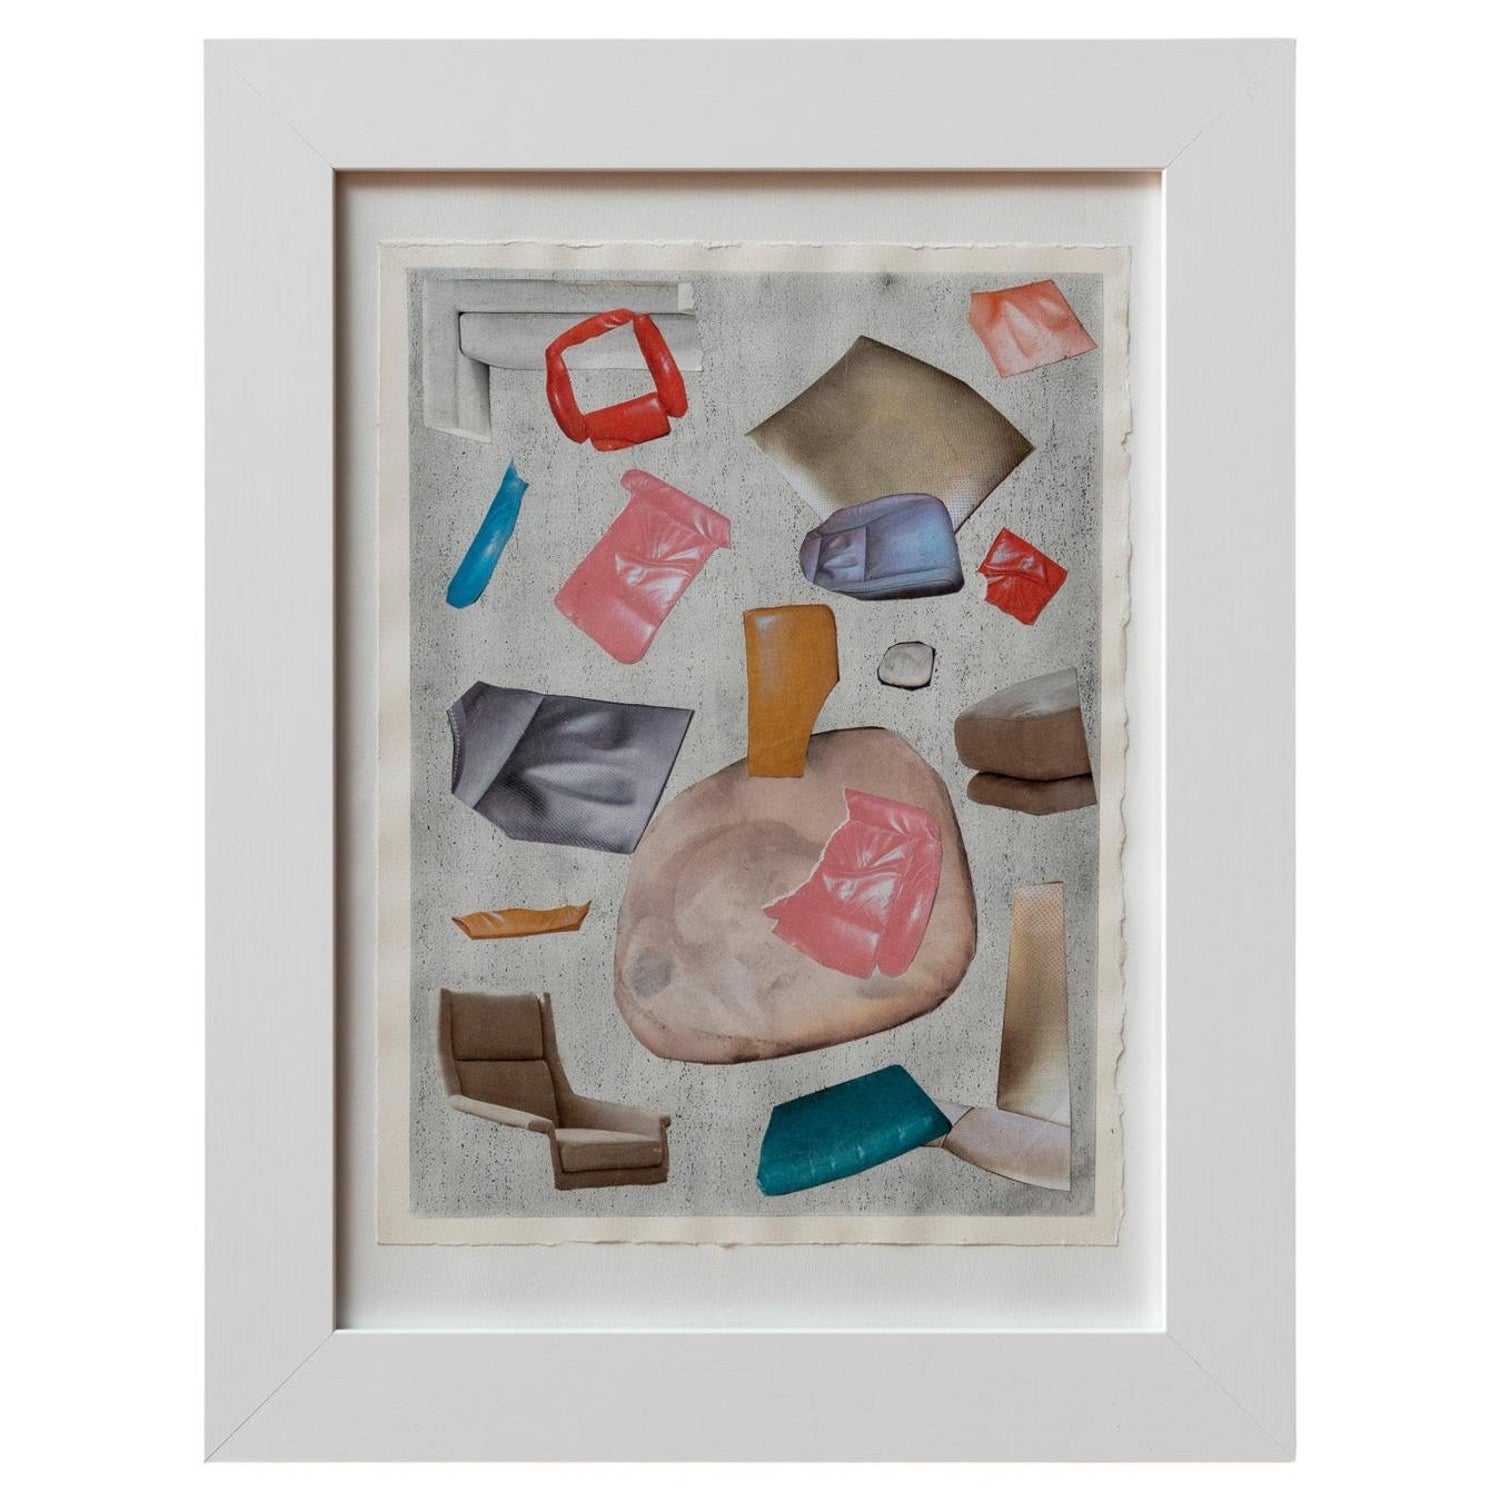 Framed Contemporary Mixed Media Collage on Paper, Ilana Harris-Babou  'Imprint I' For Sale at 1stDibs